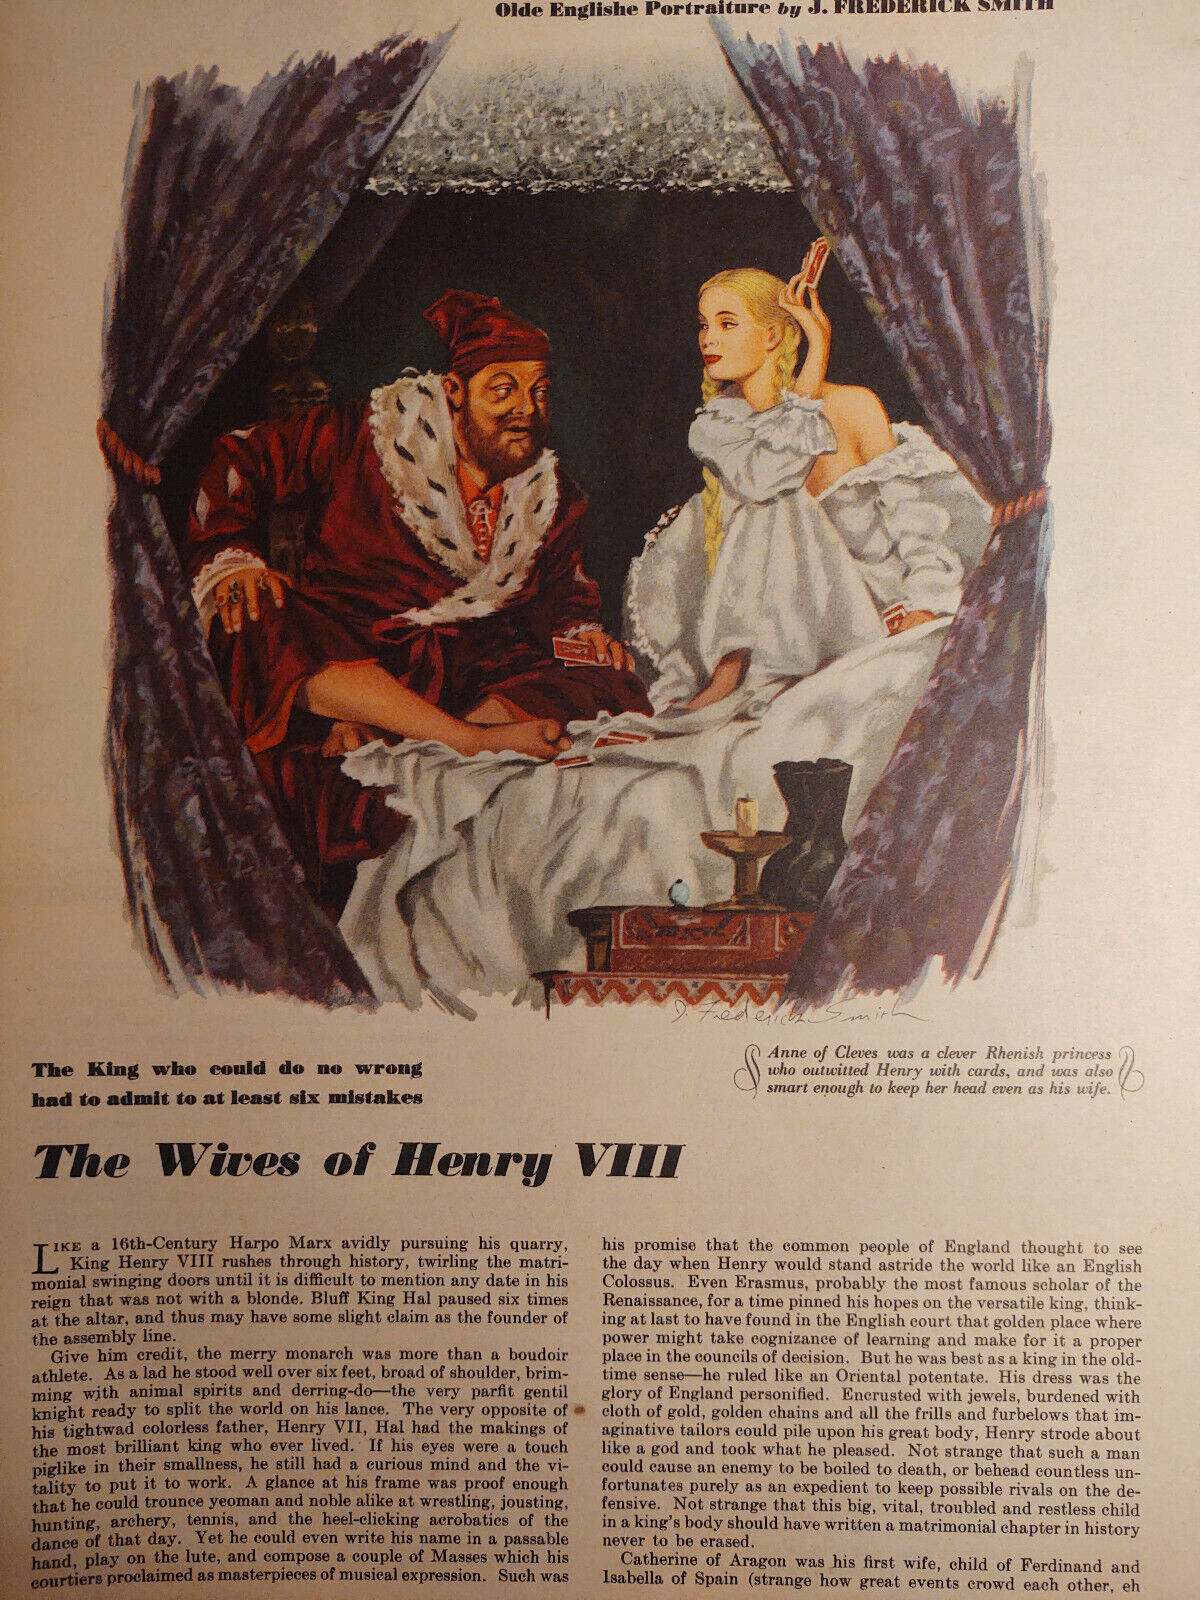 1947 Esquire Art Six Wives of Henry VIII as Pinups girls J. Frederick Smith  